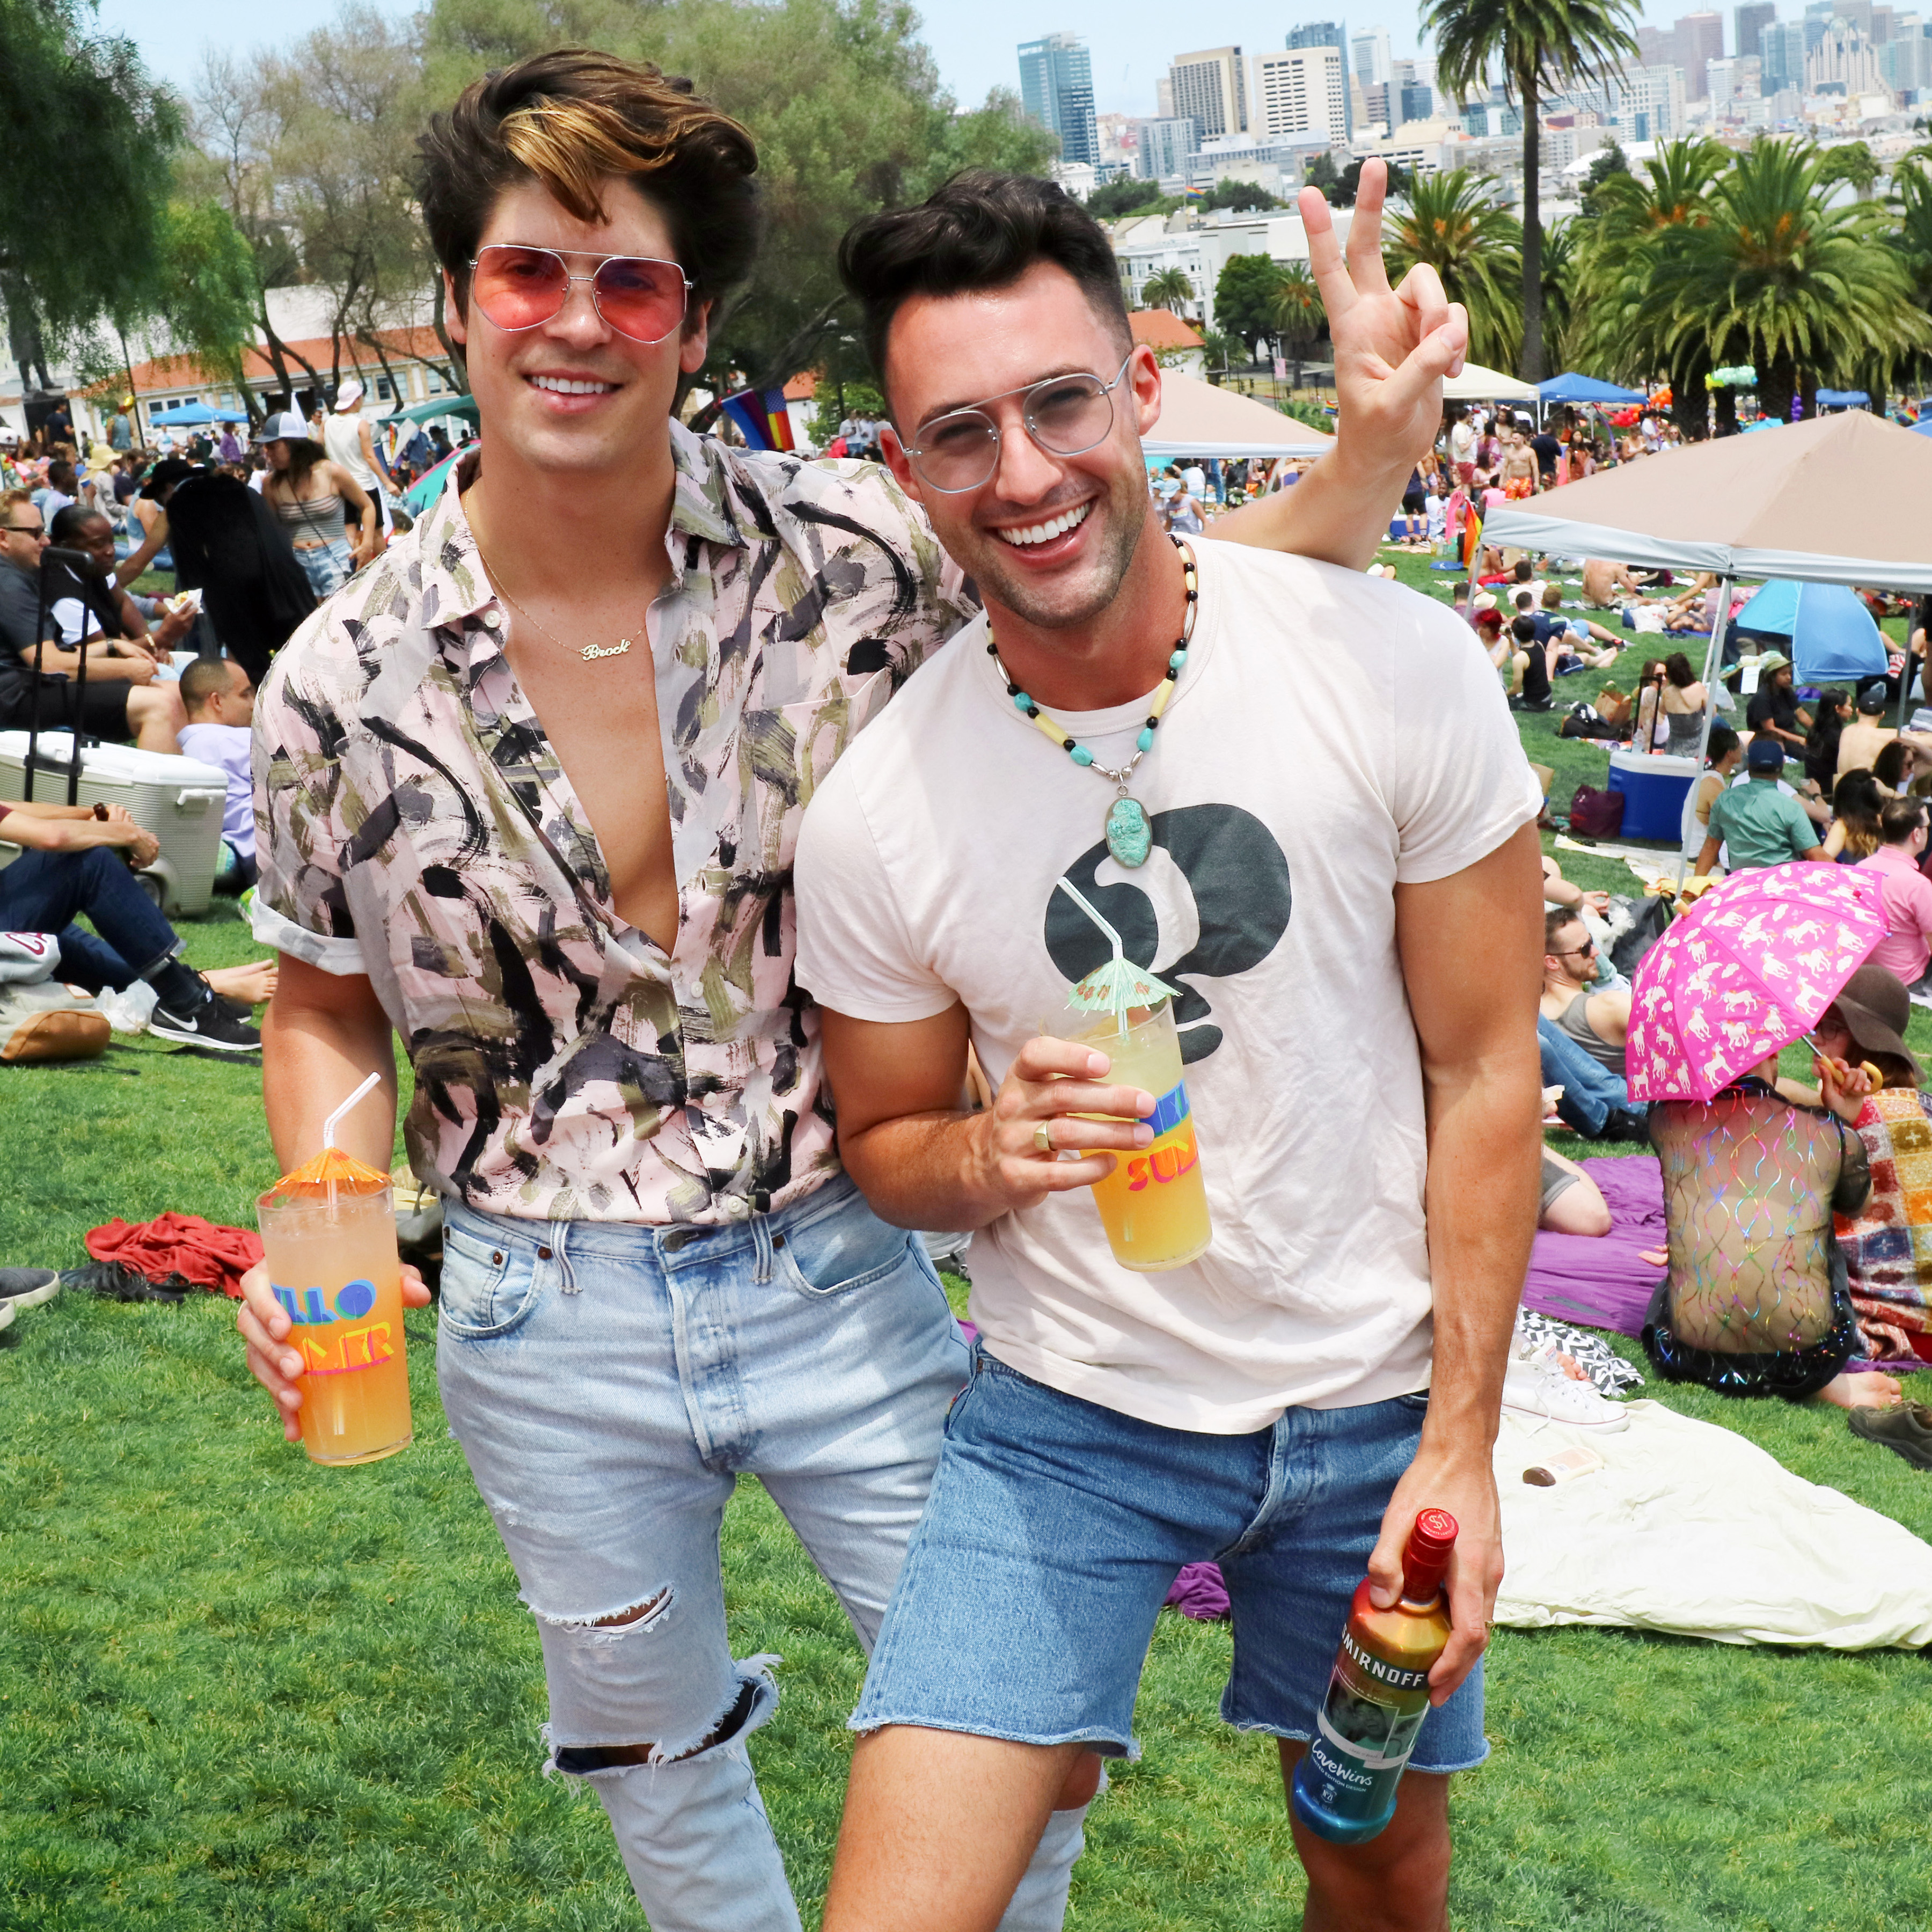 DEAR DIARY, HERE’S WHAT HAPPENED AT SF PRIDE THIS YEAR